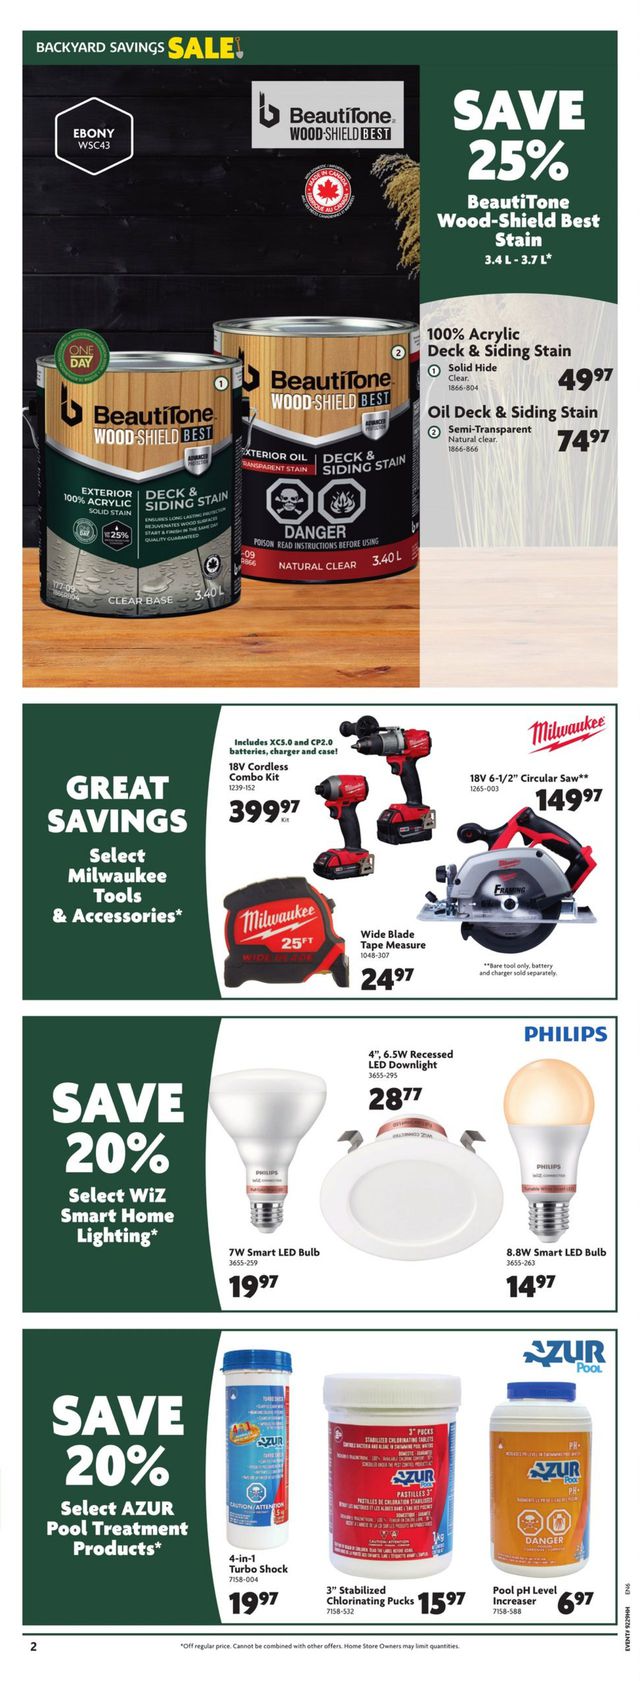 Home Hardware Flyer from 07/20/2023